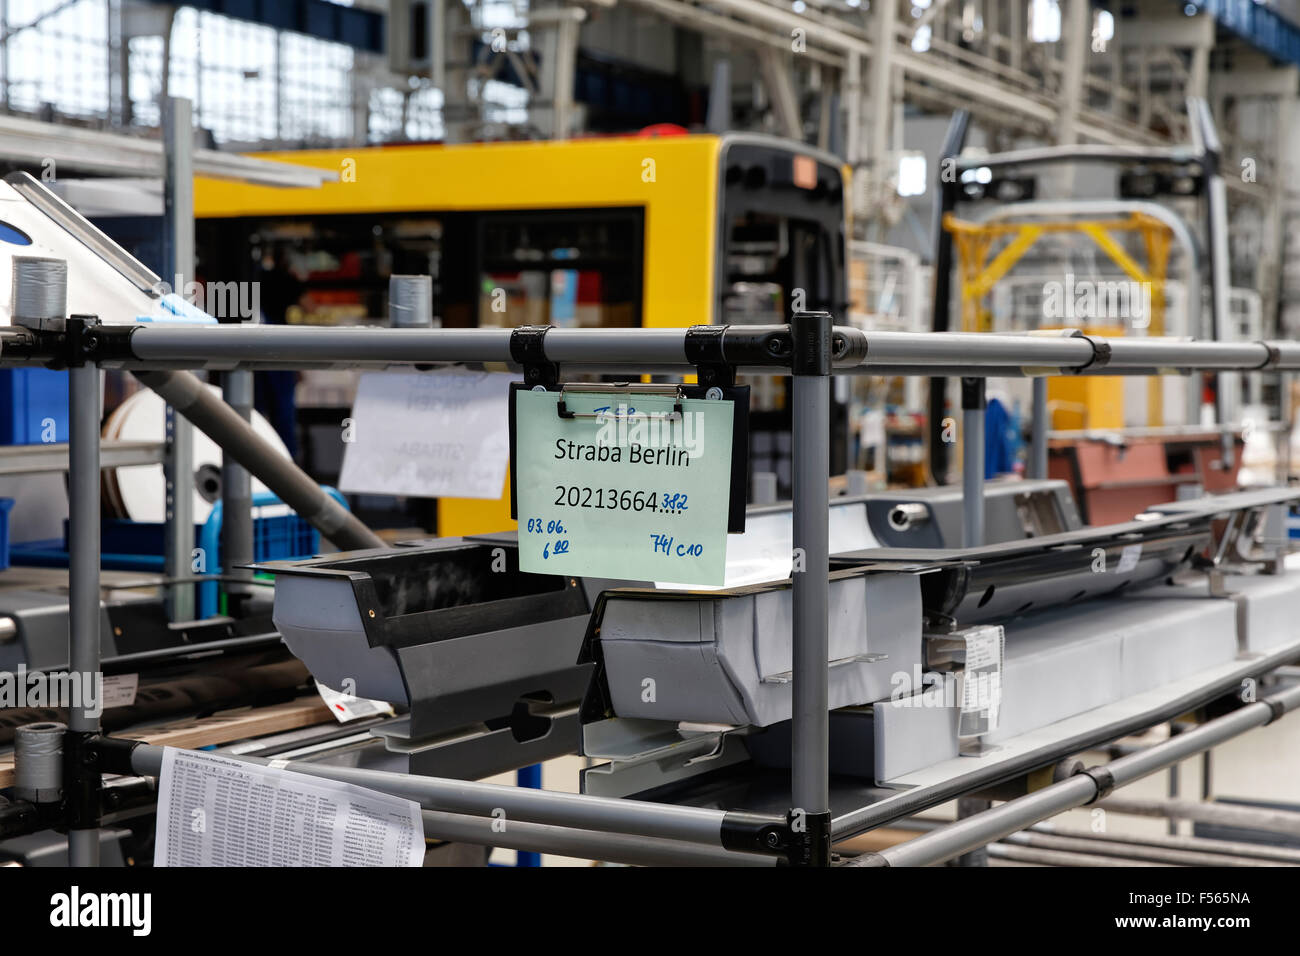 04.06.2015, Hennigsdorf, Brandenburg, Germany - Rolling stock production in Bombardier Transportation in Hennigsdorf Brandenburg plant. The picture shows the production hall with EMUs type Talent 2 for regional traffic. In the foreground car bodies for FLEXITY trams to the BVG BVG. EJH150604D611CAROEX.JPG - NOT for SALE in G E R M A N Y, A U S T R I A, S W I T Z E R L A N D [MODEL RELEASE: NOT APPLICABLE, PROPERTY RELEASE: NO (c) caro photo agency / Heinrich, http://www.caro-images.pl, info@carofoto.pl - In case of using the picture for non-journalistic purposes, please contact the agency - th Stock Photo